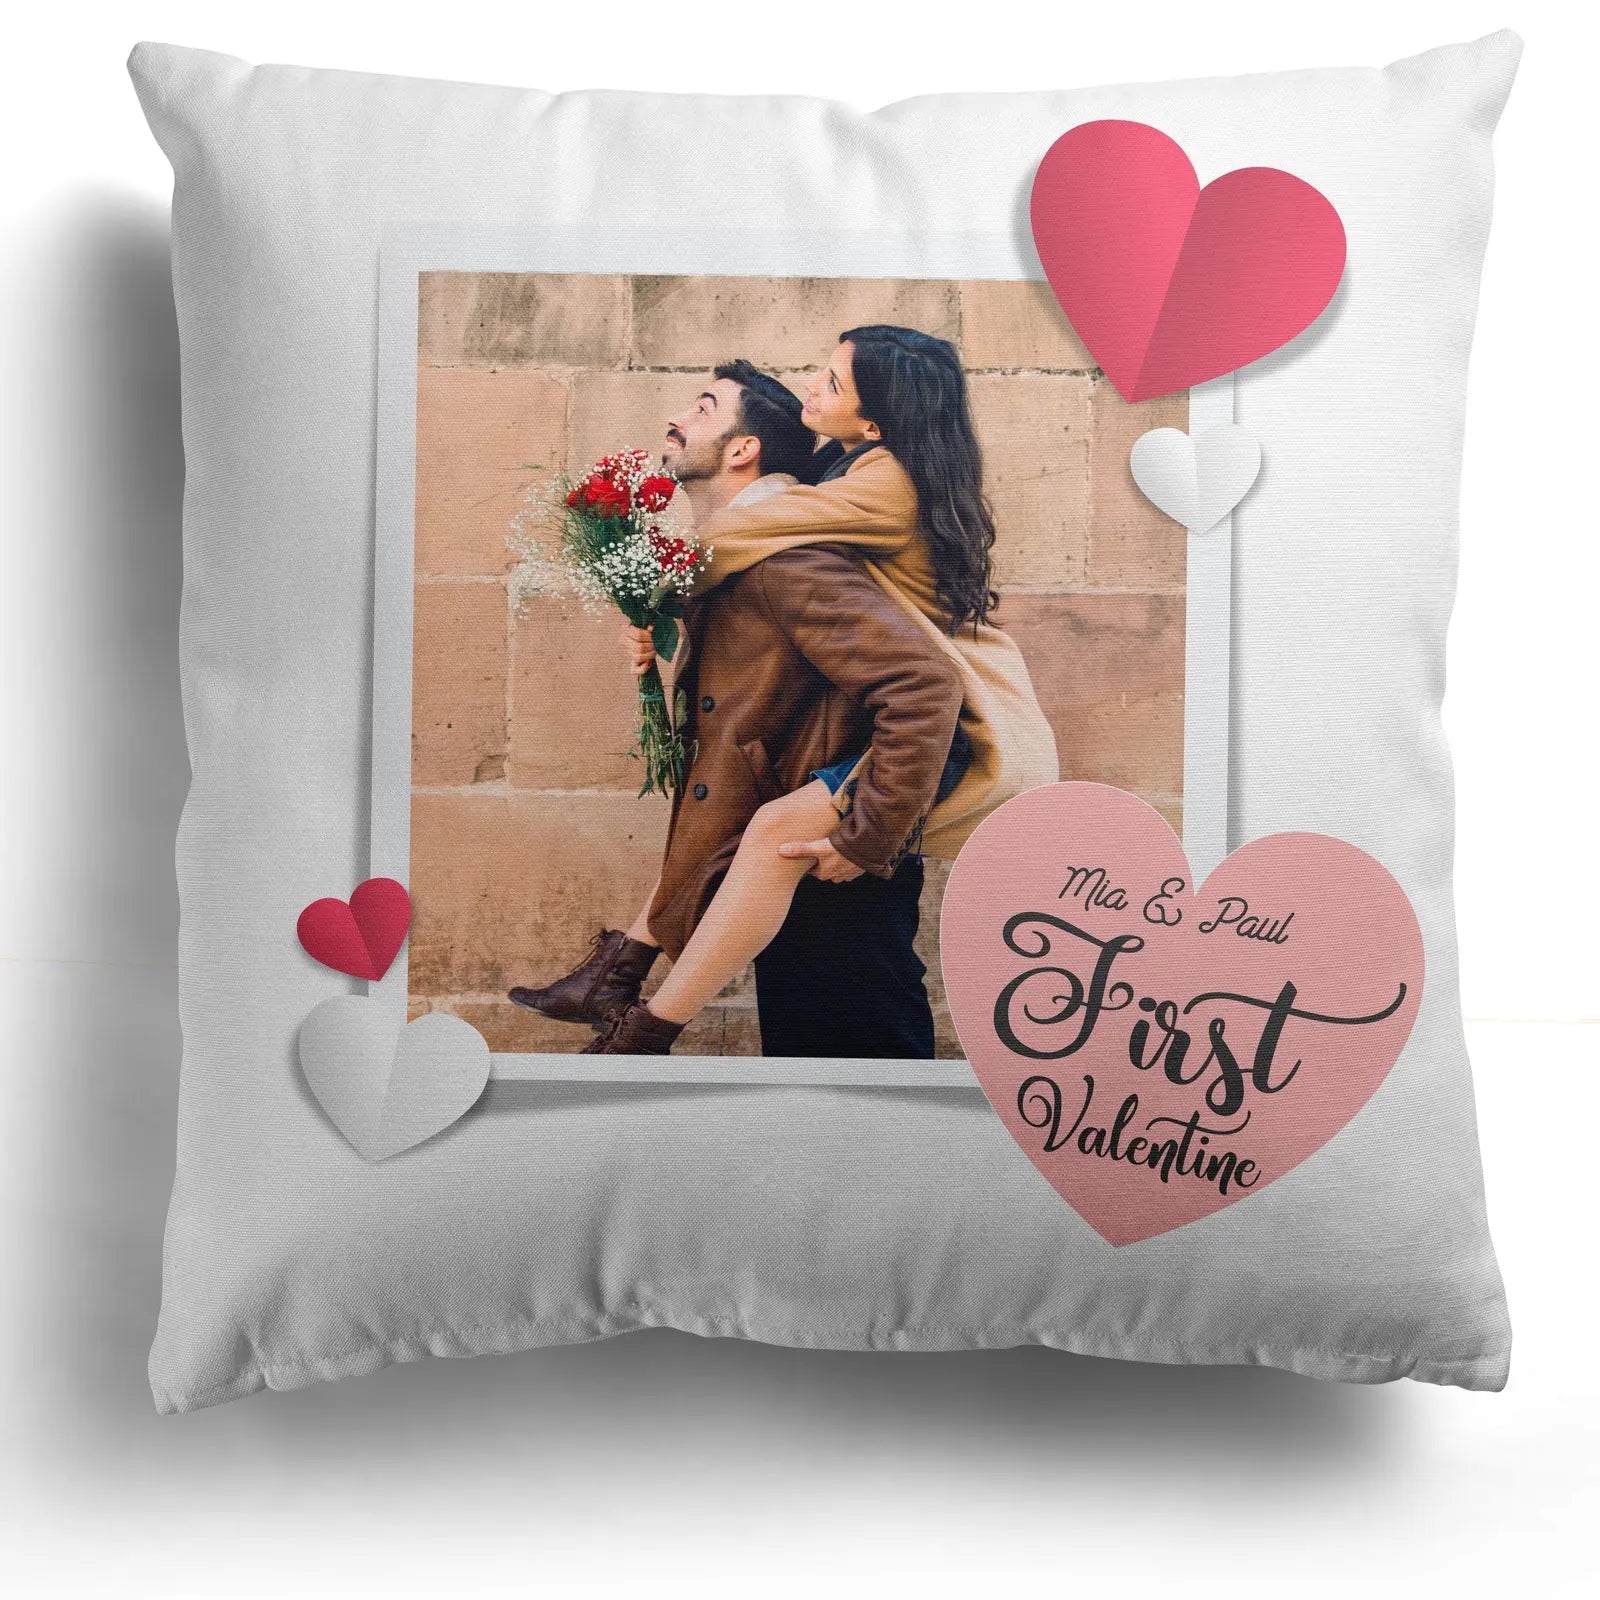 Personalised Cushion  Valentines Day  Couples & Romance  40x40cm  1 Image Heart